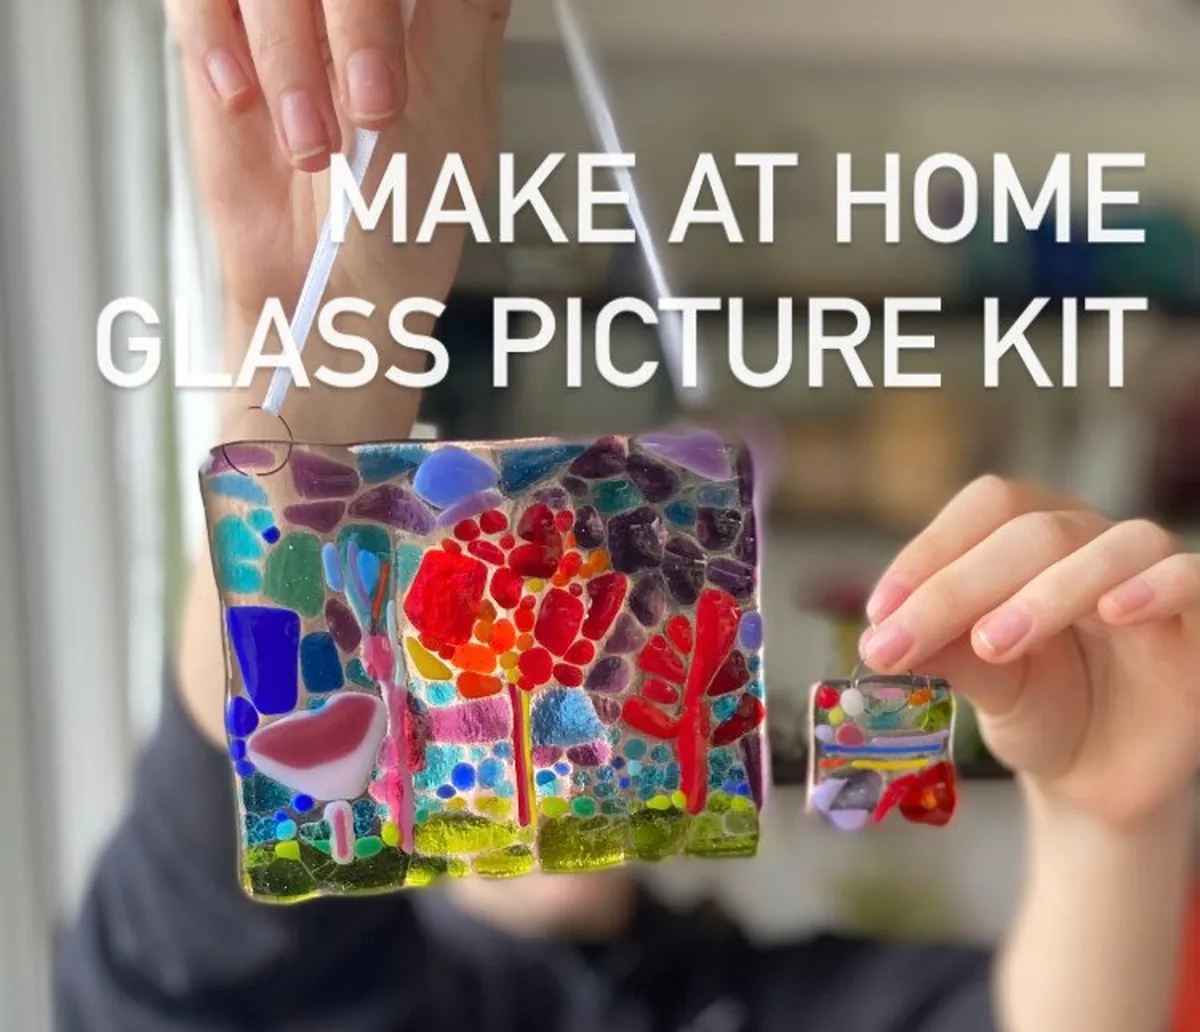 DIY stained glass - Gathered